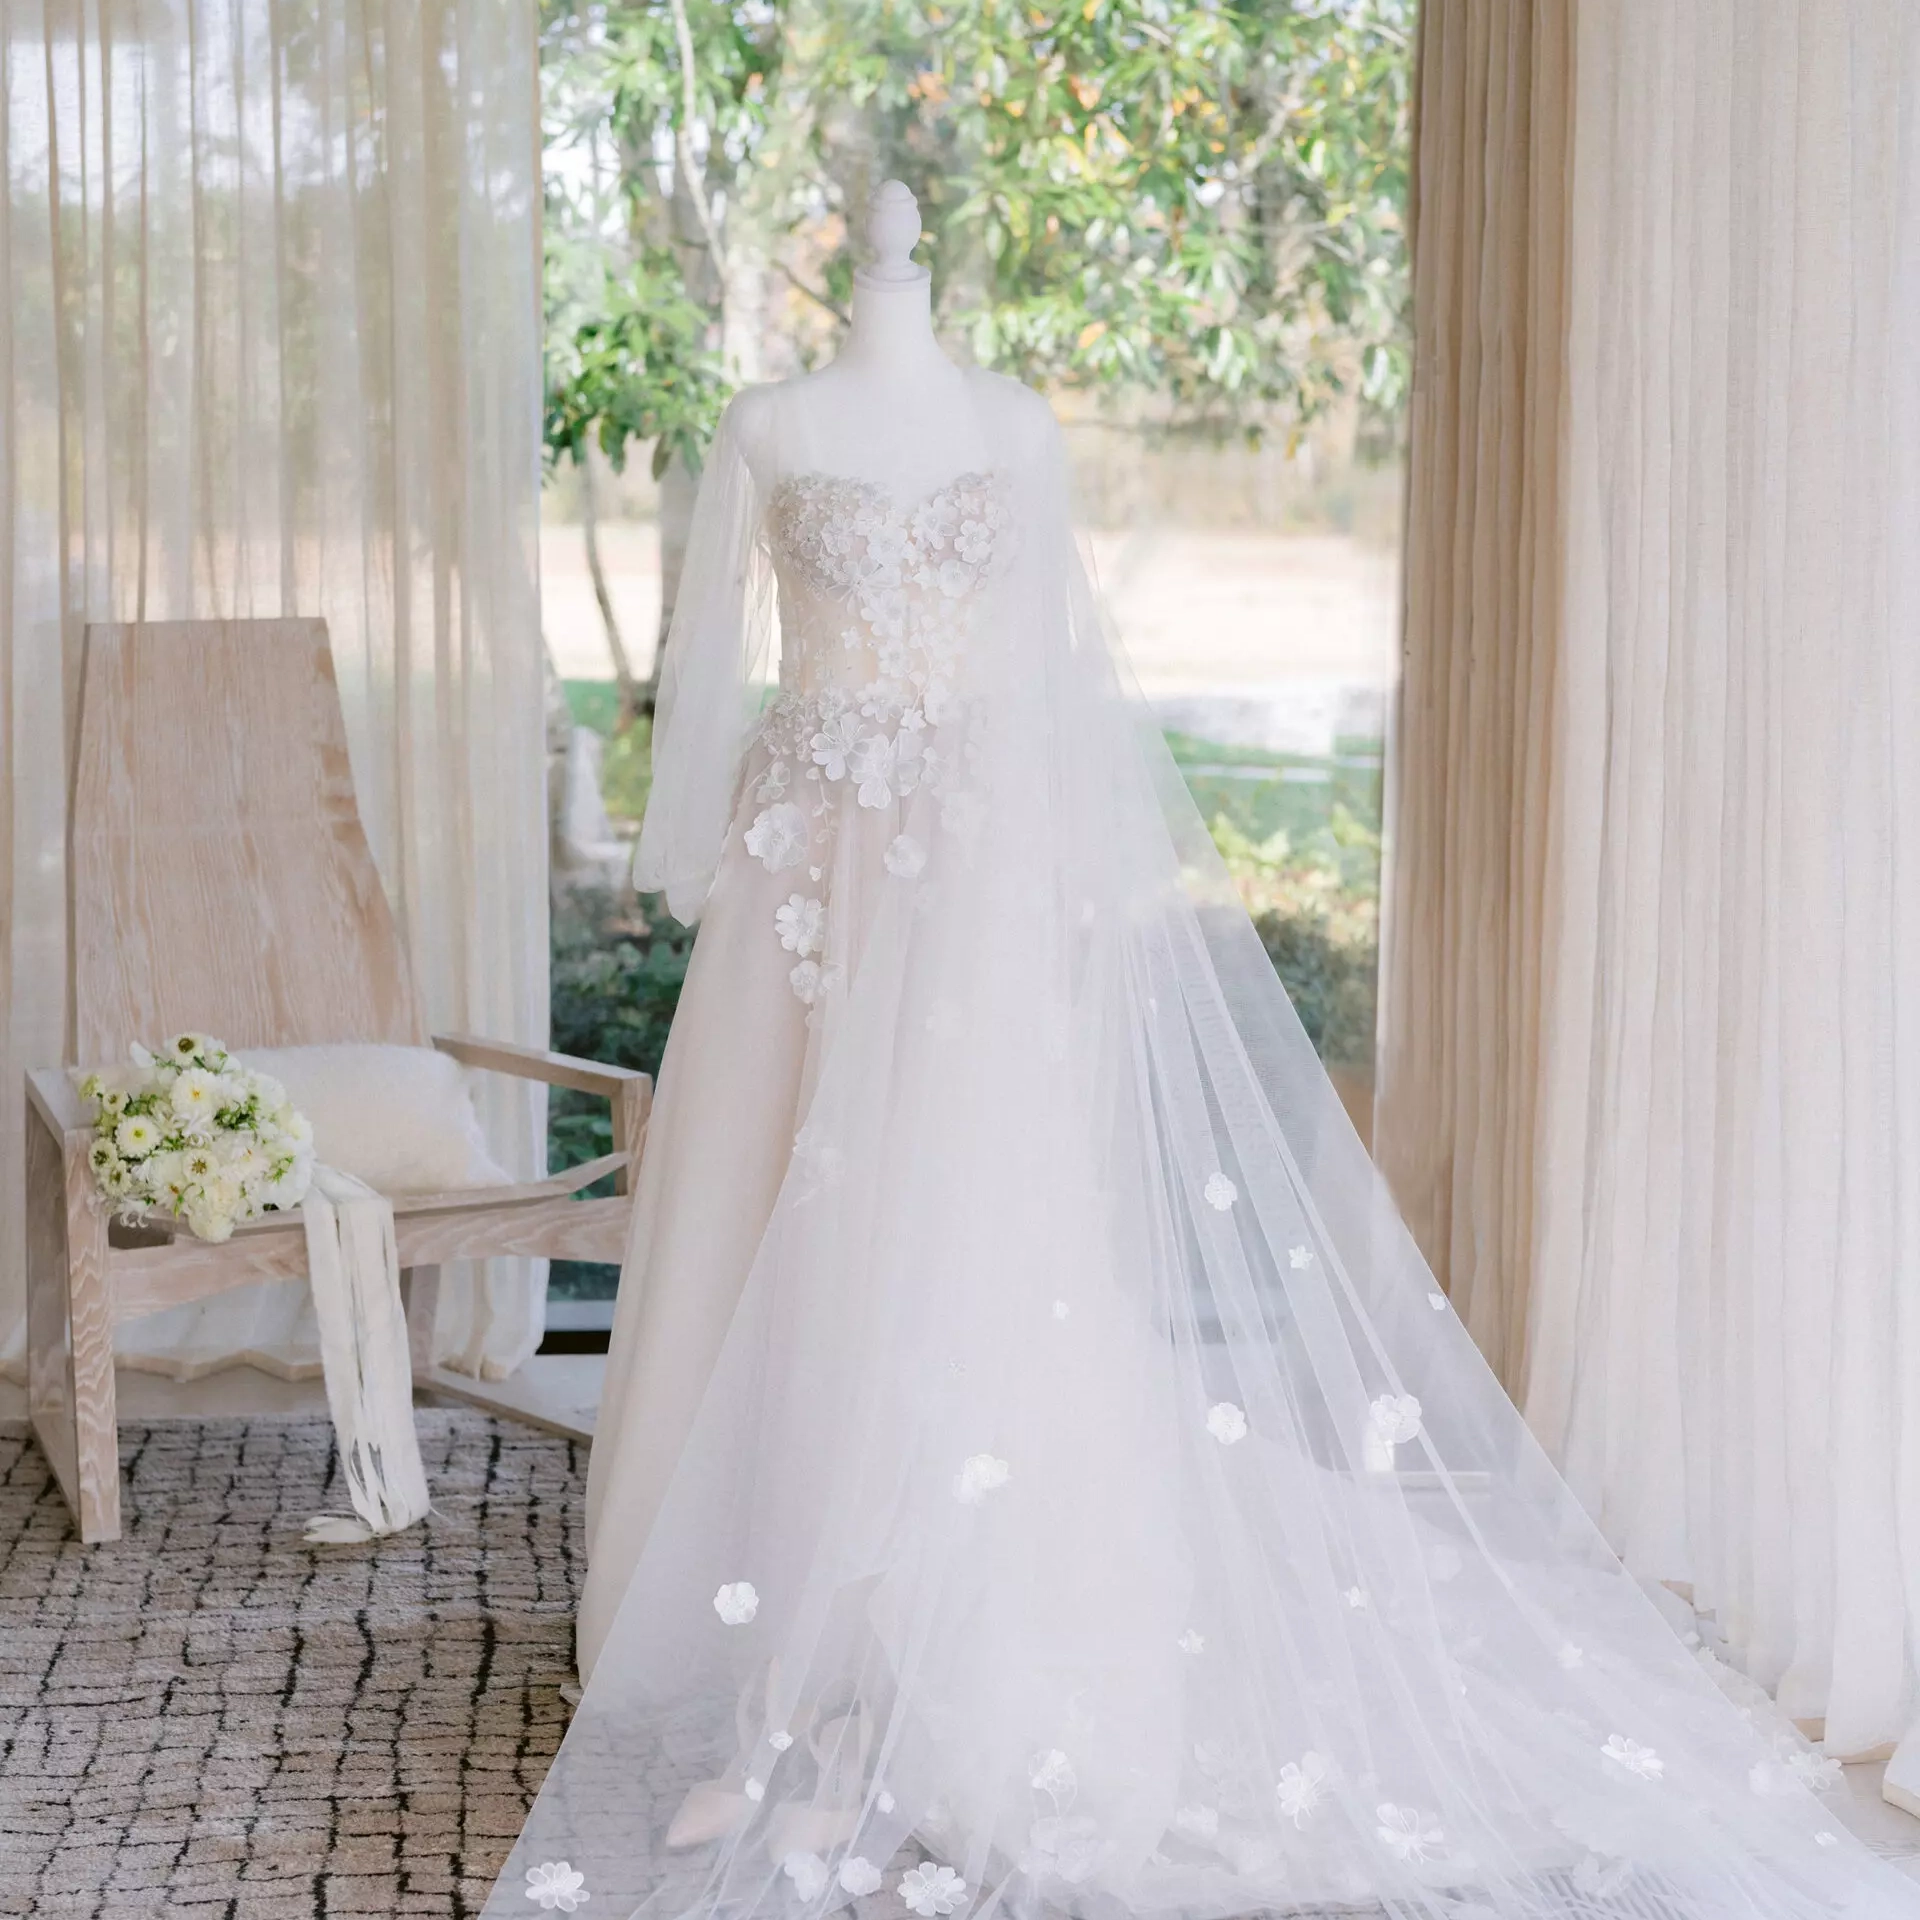 What to Do if Your Wedding Dress Is Too Big?